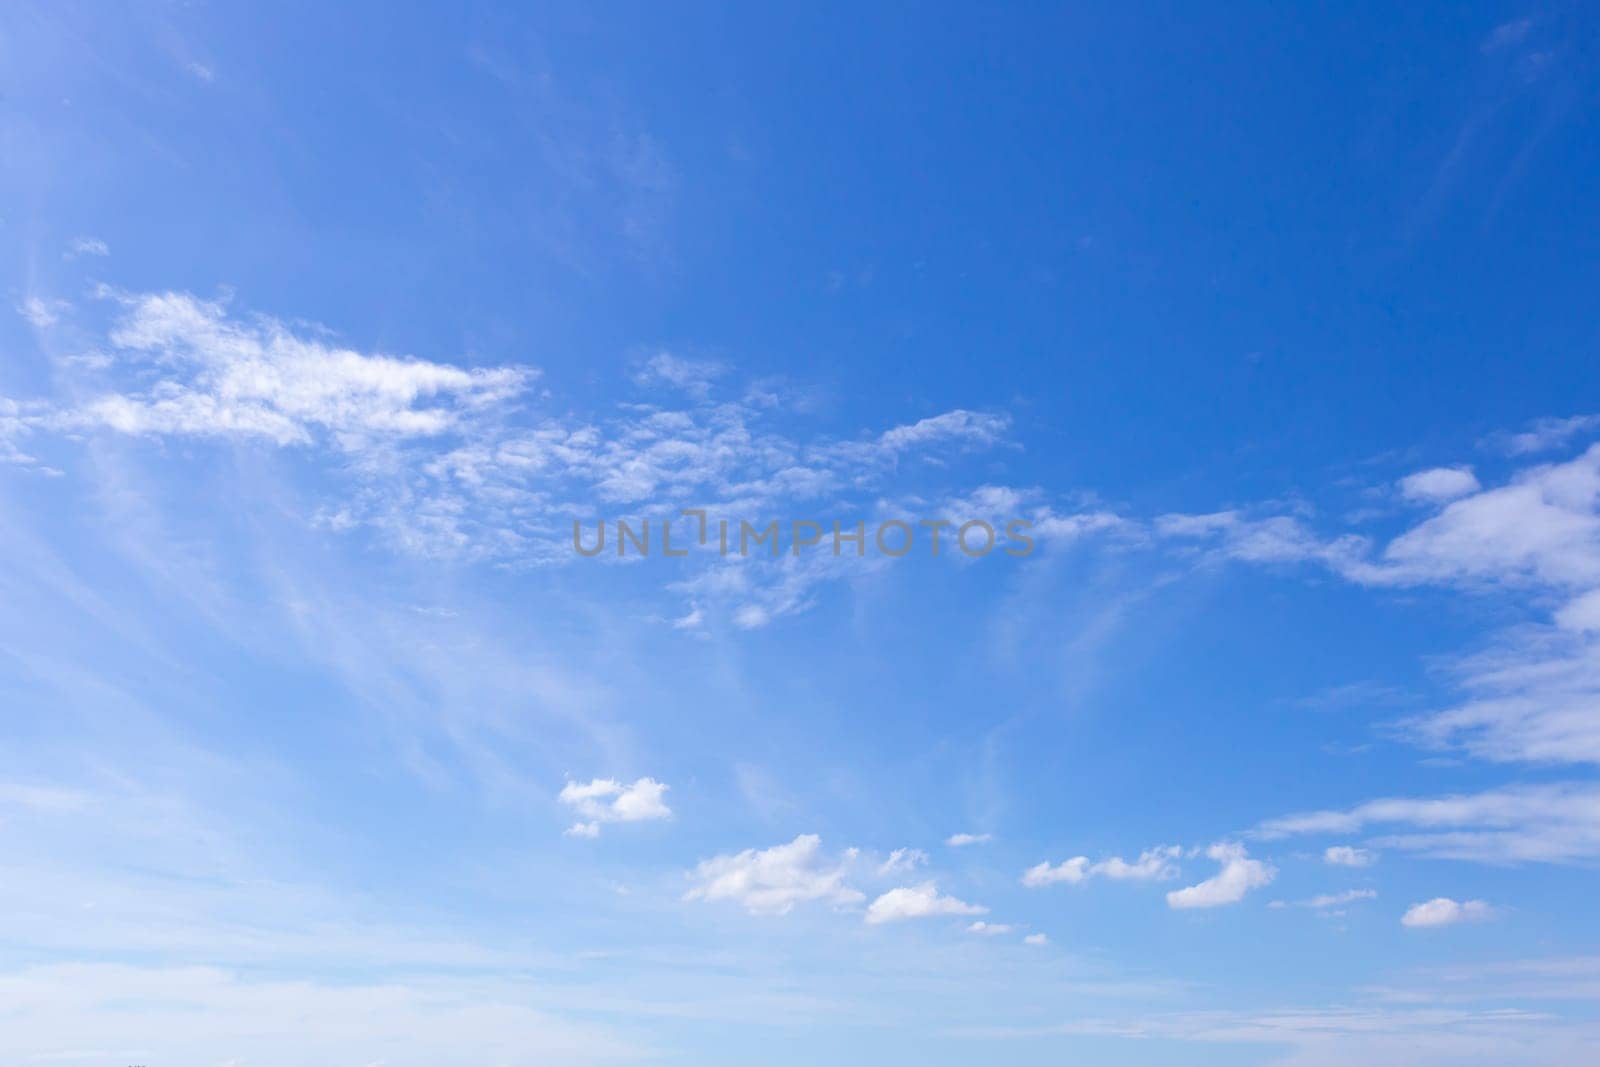 The Blue sky with scattered clouds by Gamjai